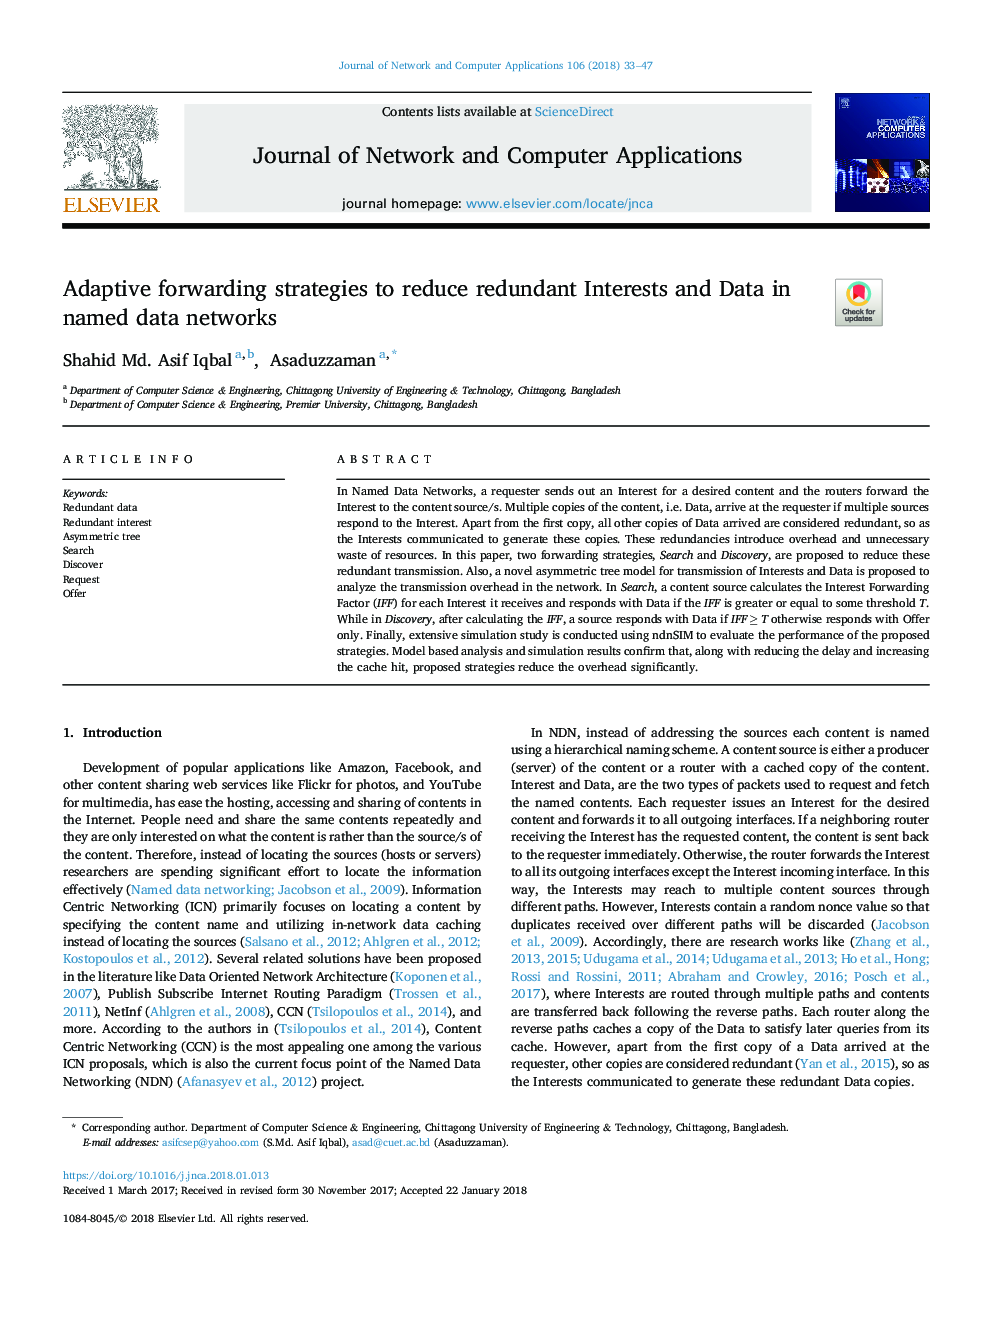 Adaptive forwarding strategies to reduce redundant Interests and Data in named data networks